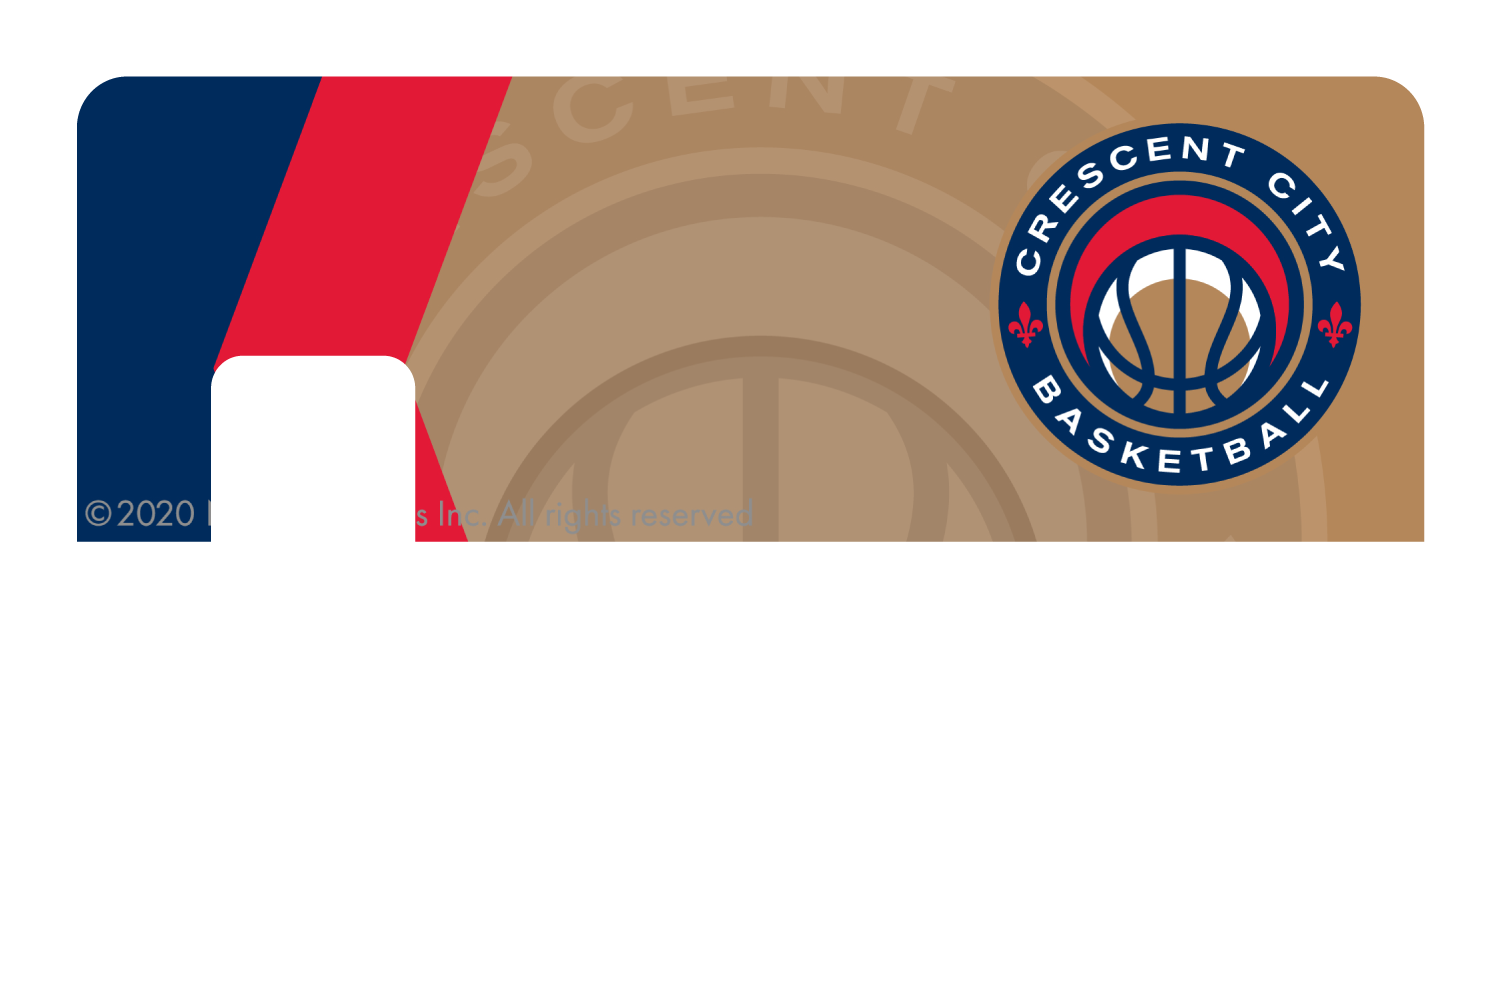 New Orleans Pelicans: Crossover